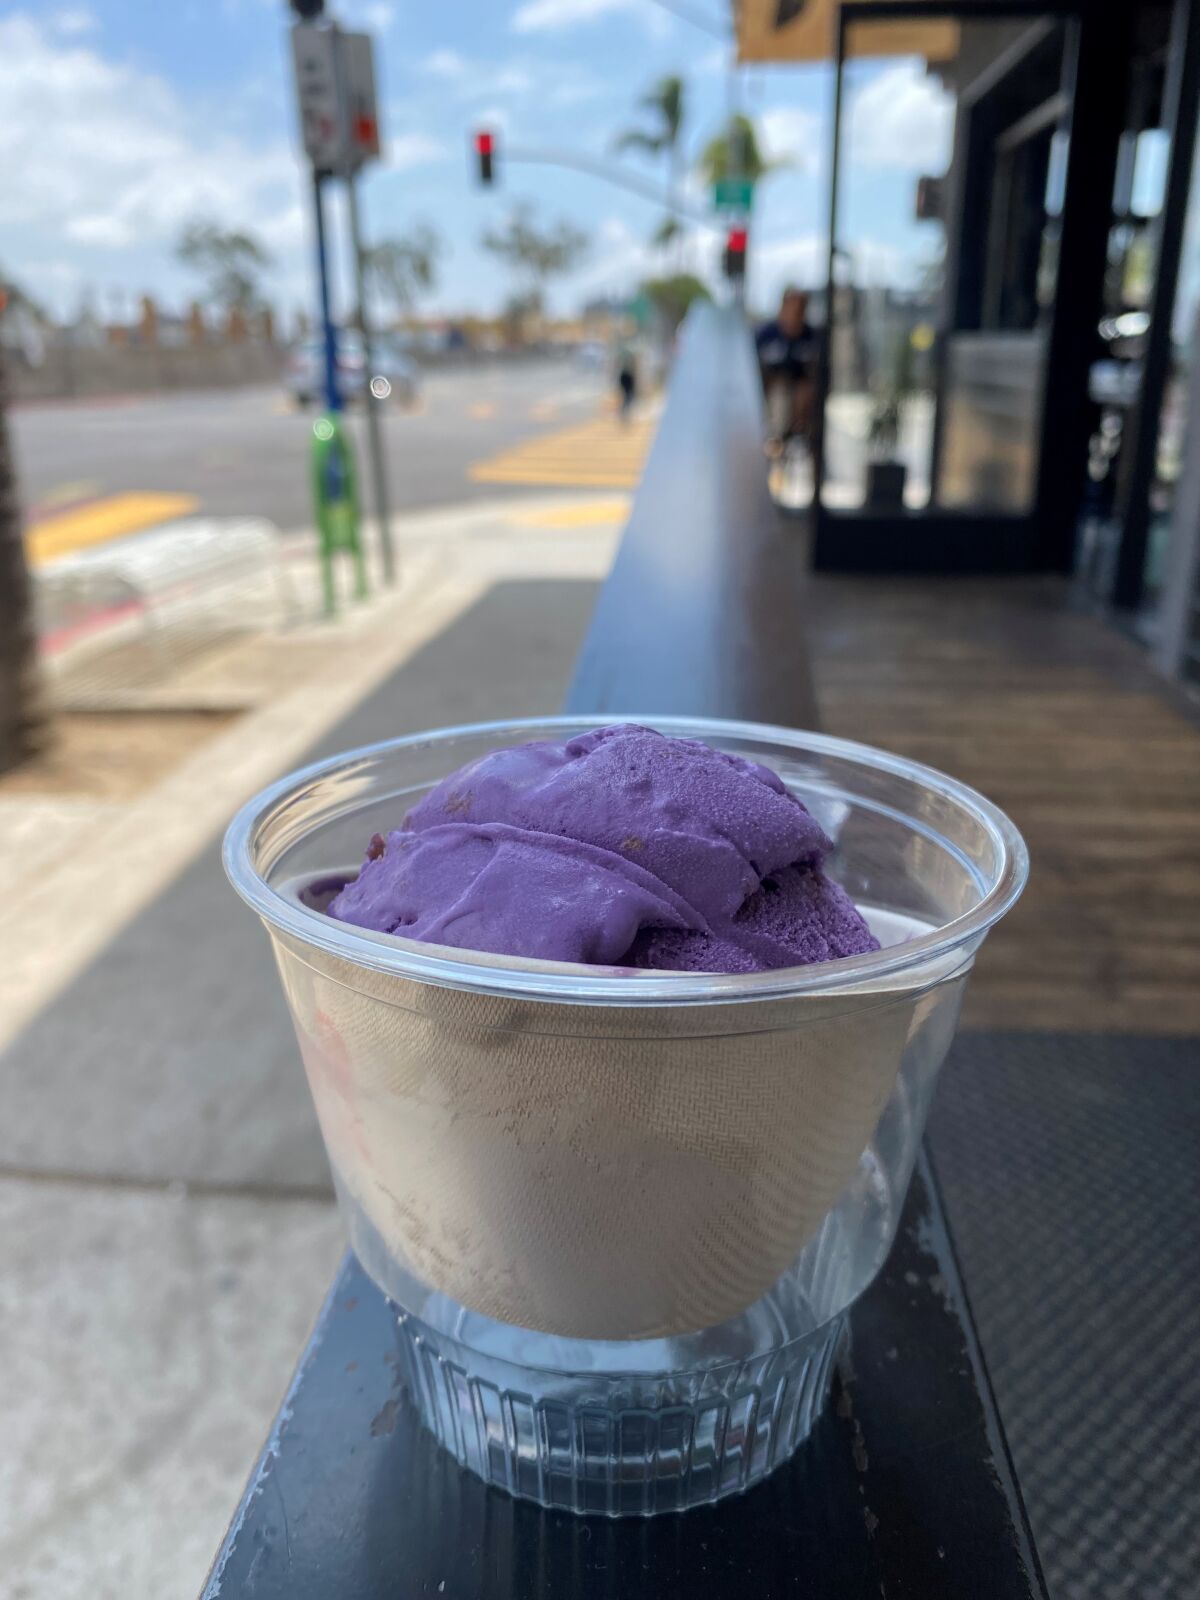 Stella Jean's in University Heights serves up unique ice cream flavors like this Ube & Pandesal Toffee option.